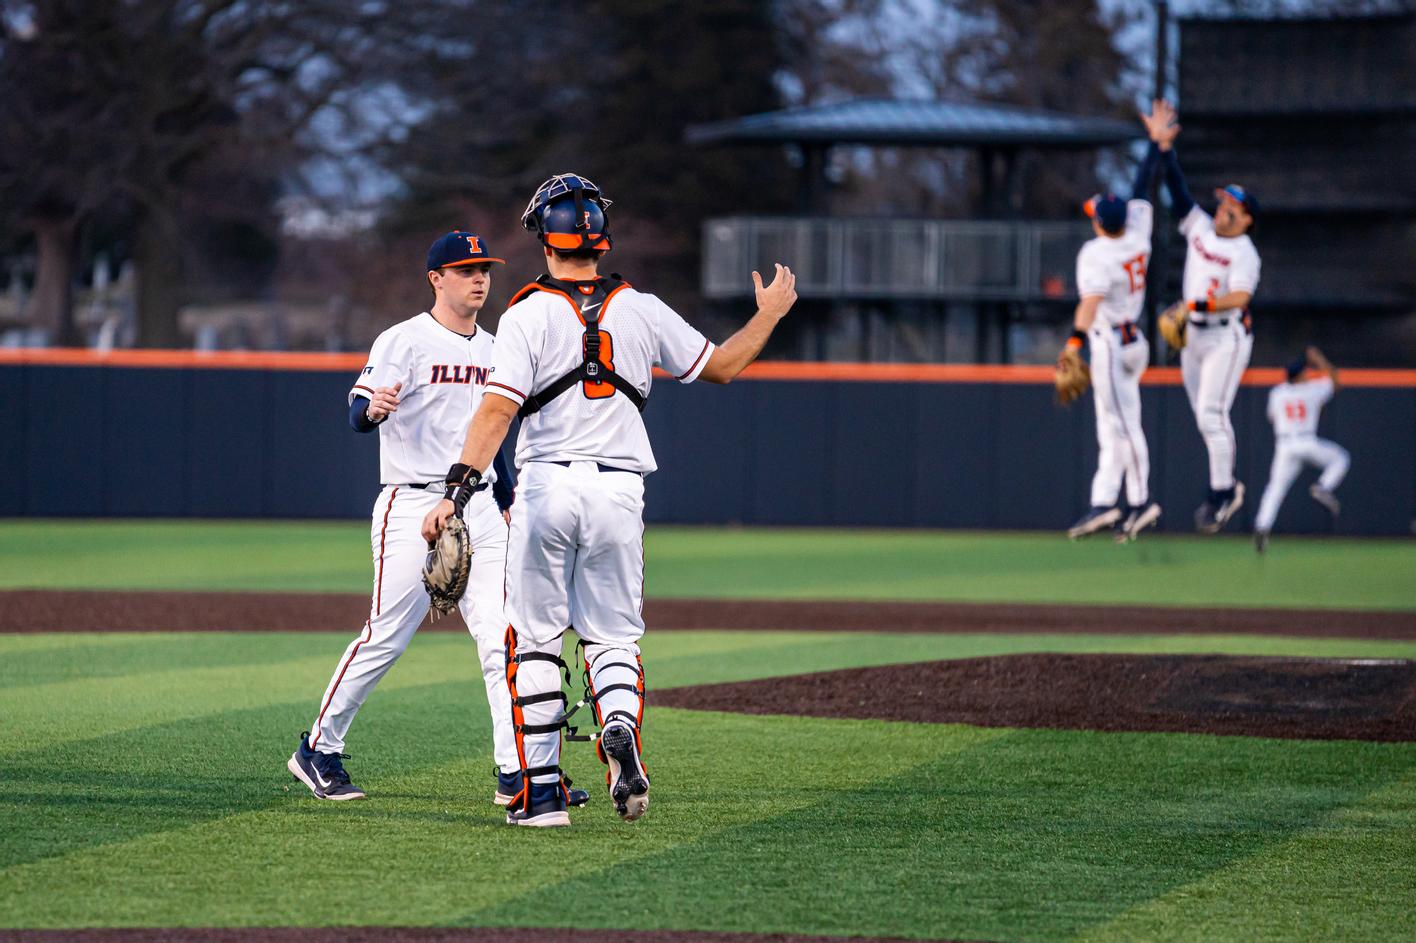 Illini Baseball Set for Midweek Contest at Indiana State